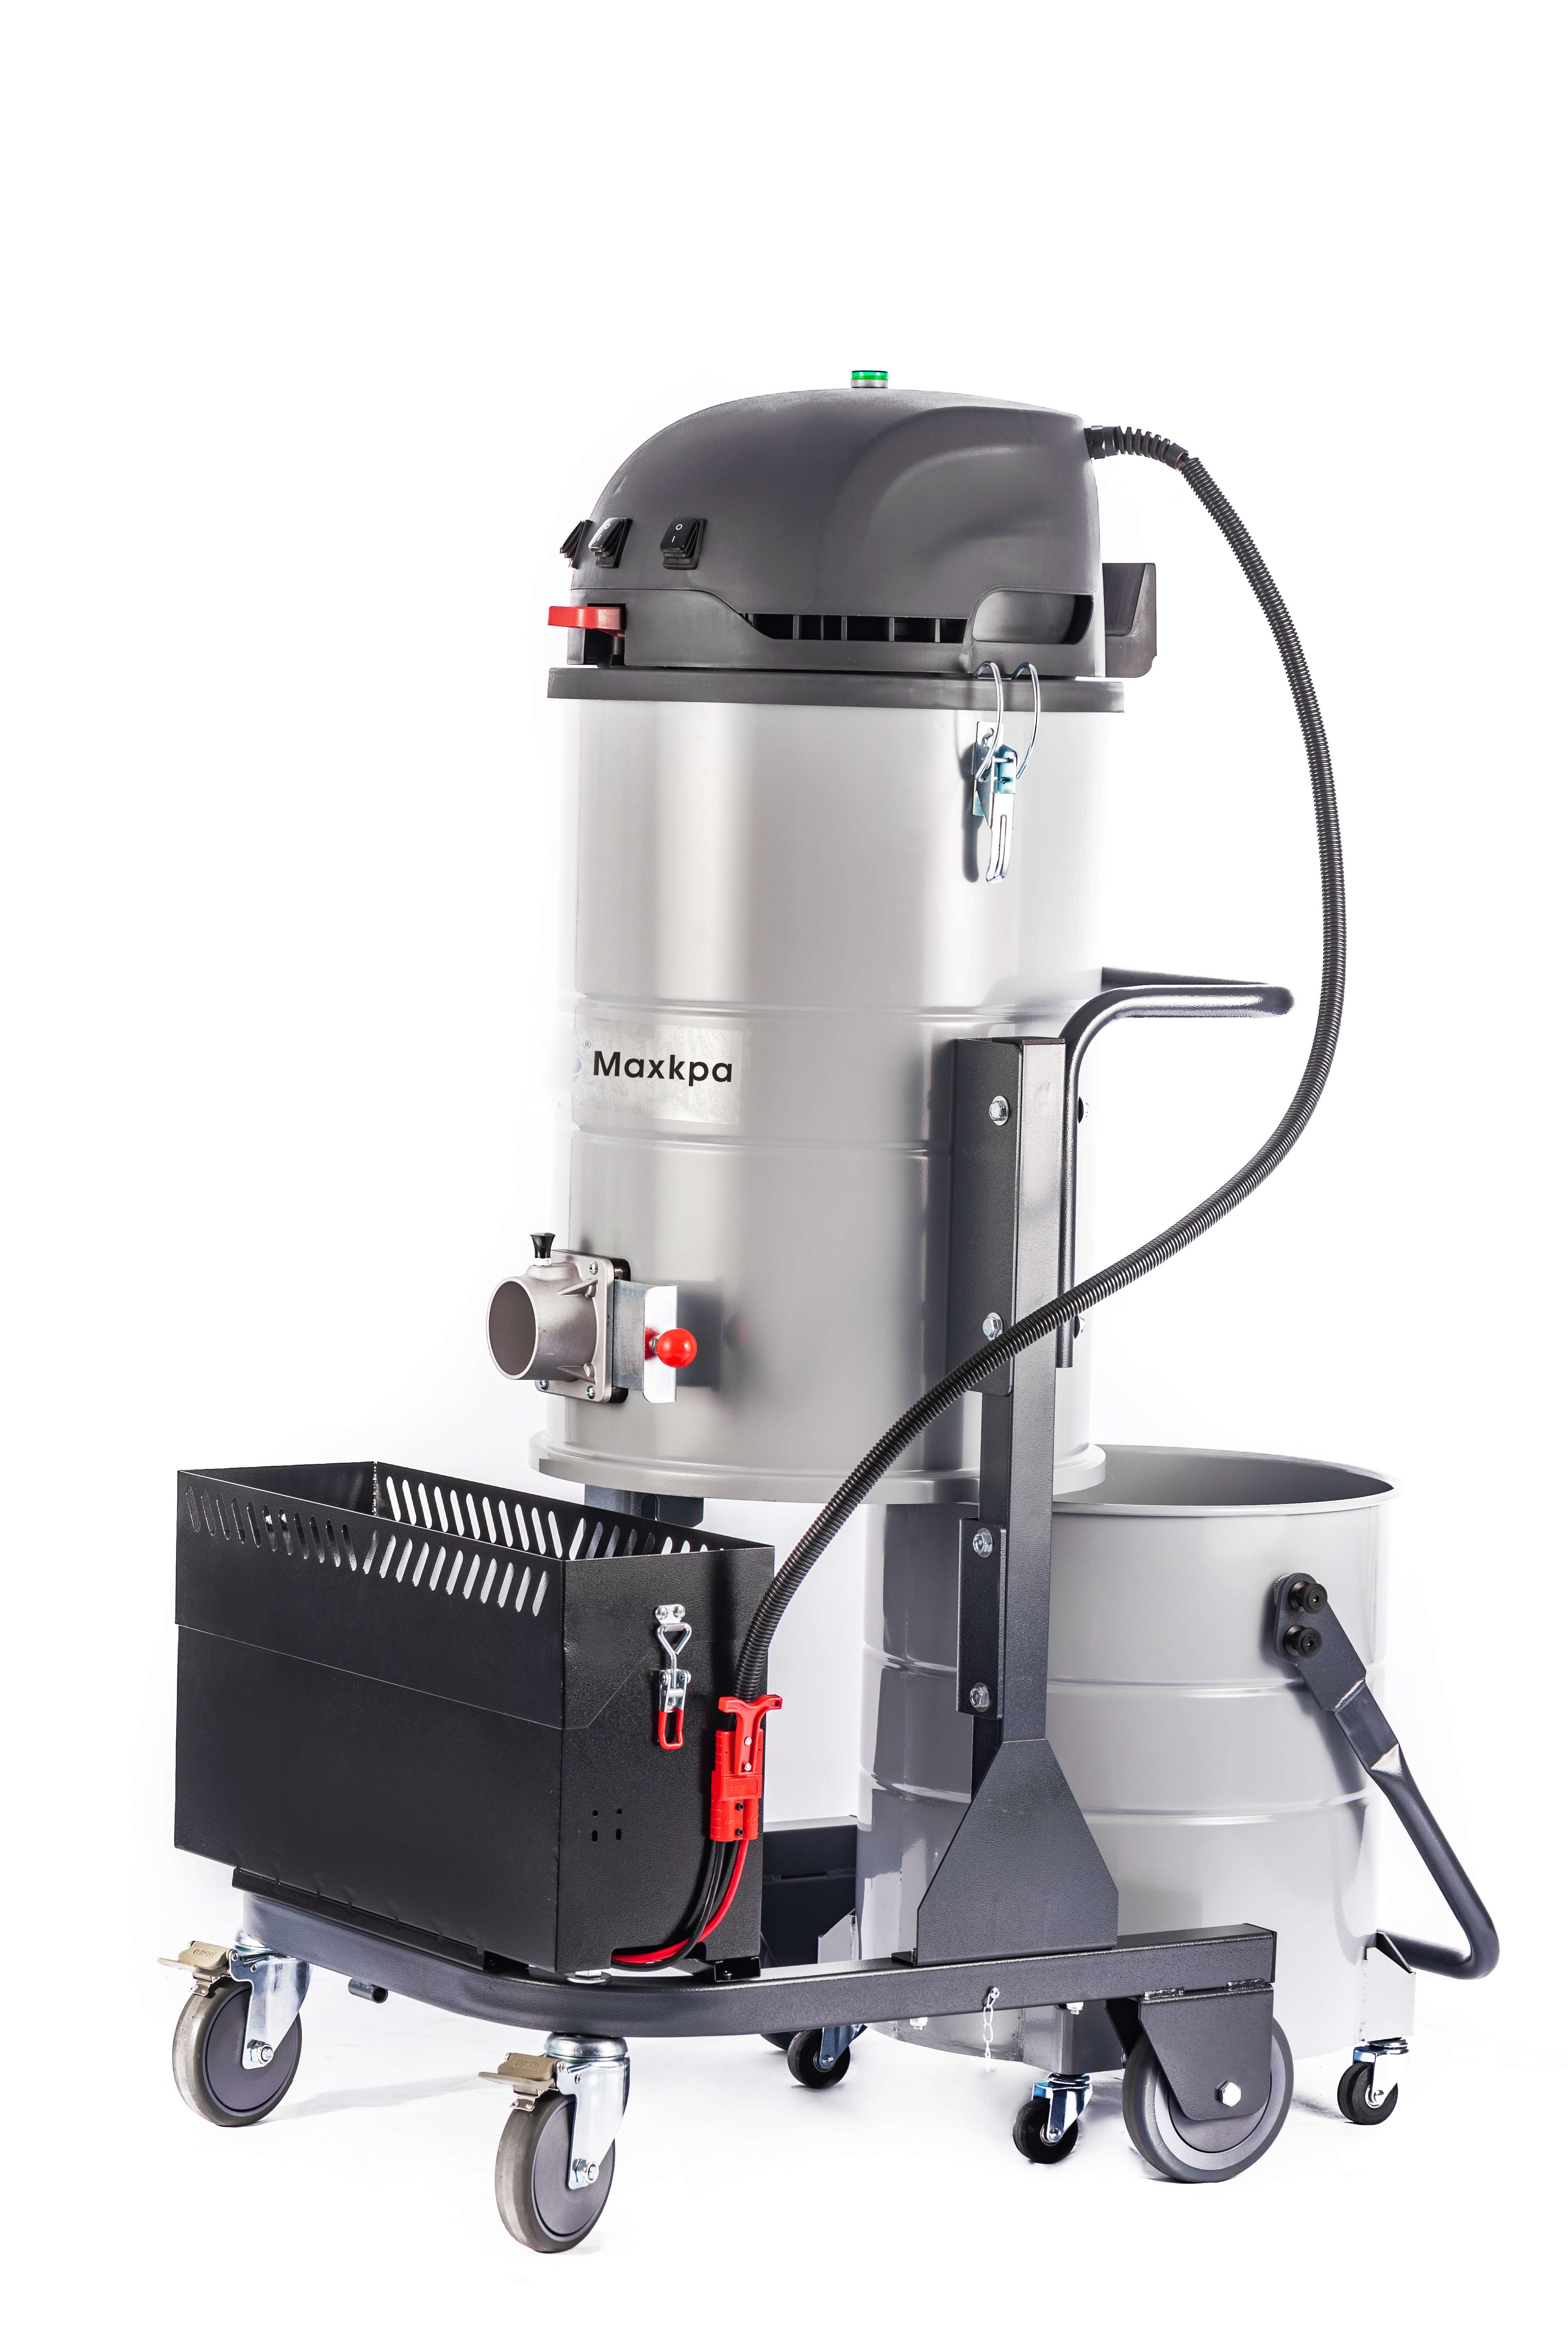 Industrial Vacuum Cleaners: A Must-Have Tool for Industrial Cleaning